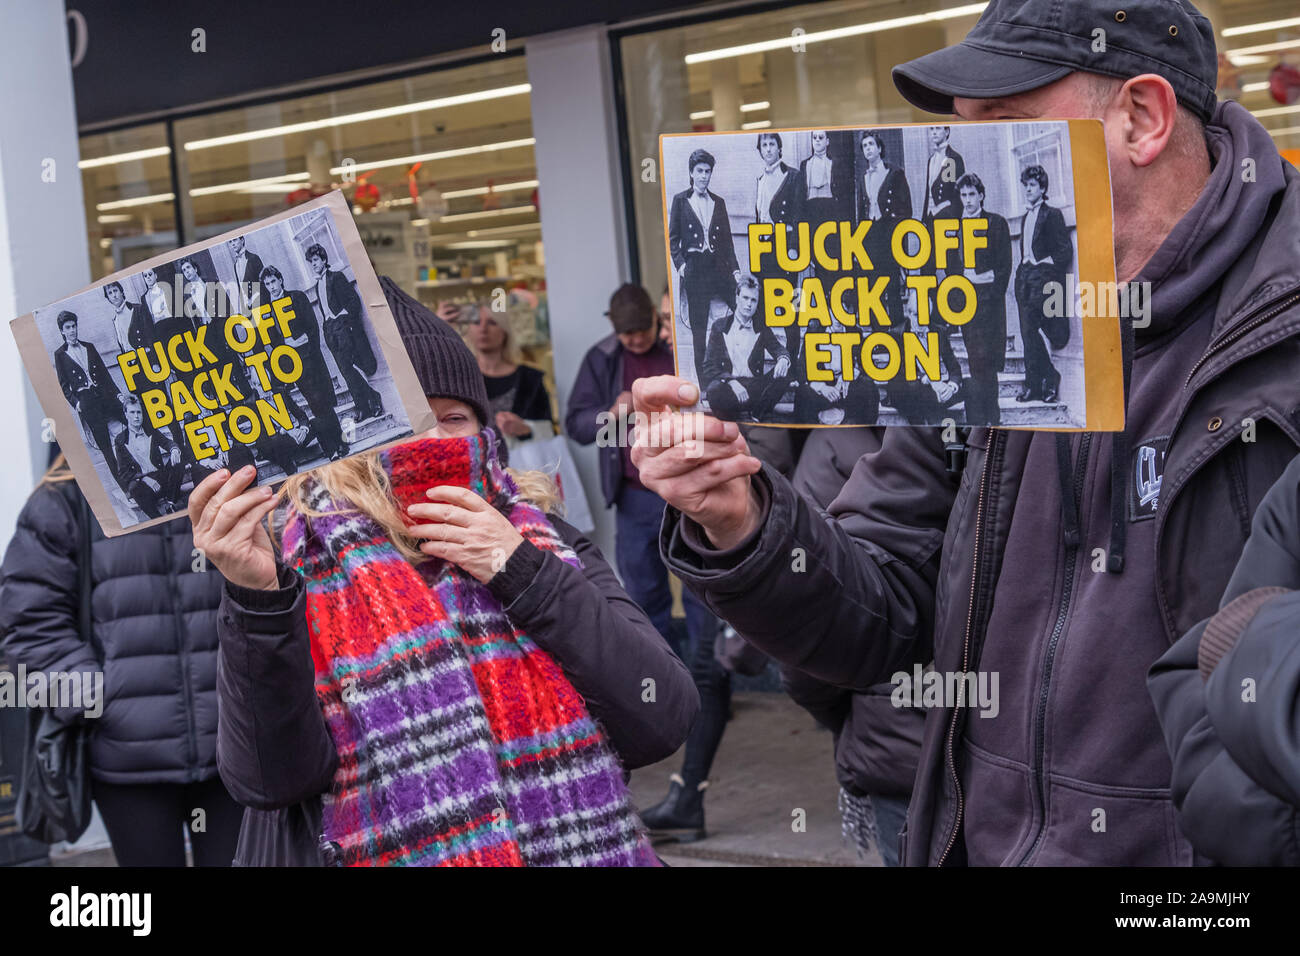 London, UK. 16th November 2019. Anarchists join the protest saying 'Why Vote? Revolt!' as FCKBoris in orange knitted hats walk through Uxbridge shopping centre handing out fliers urging everyone to register and vote against Boris Johnson and kick him out for his racist, elitist politics. They marched with a sound system on a bus to Brunel University to persuade students. Johnson had a majority of just over 5 thousand in 2017 and Labour candidate Ali Milani has strong hopes of beating him and the other 10 candidates. Peter Marshall/Alamy Live News Stock Photo